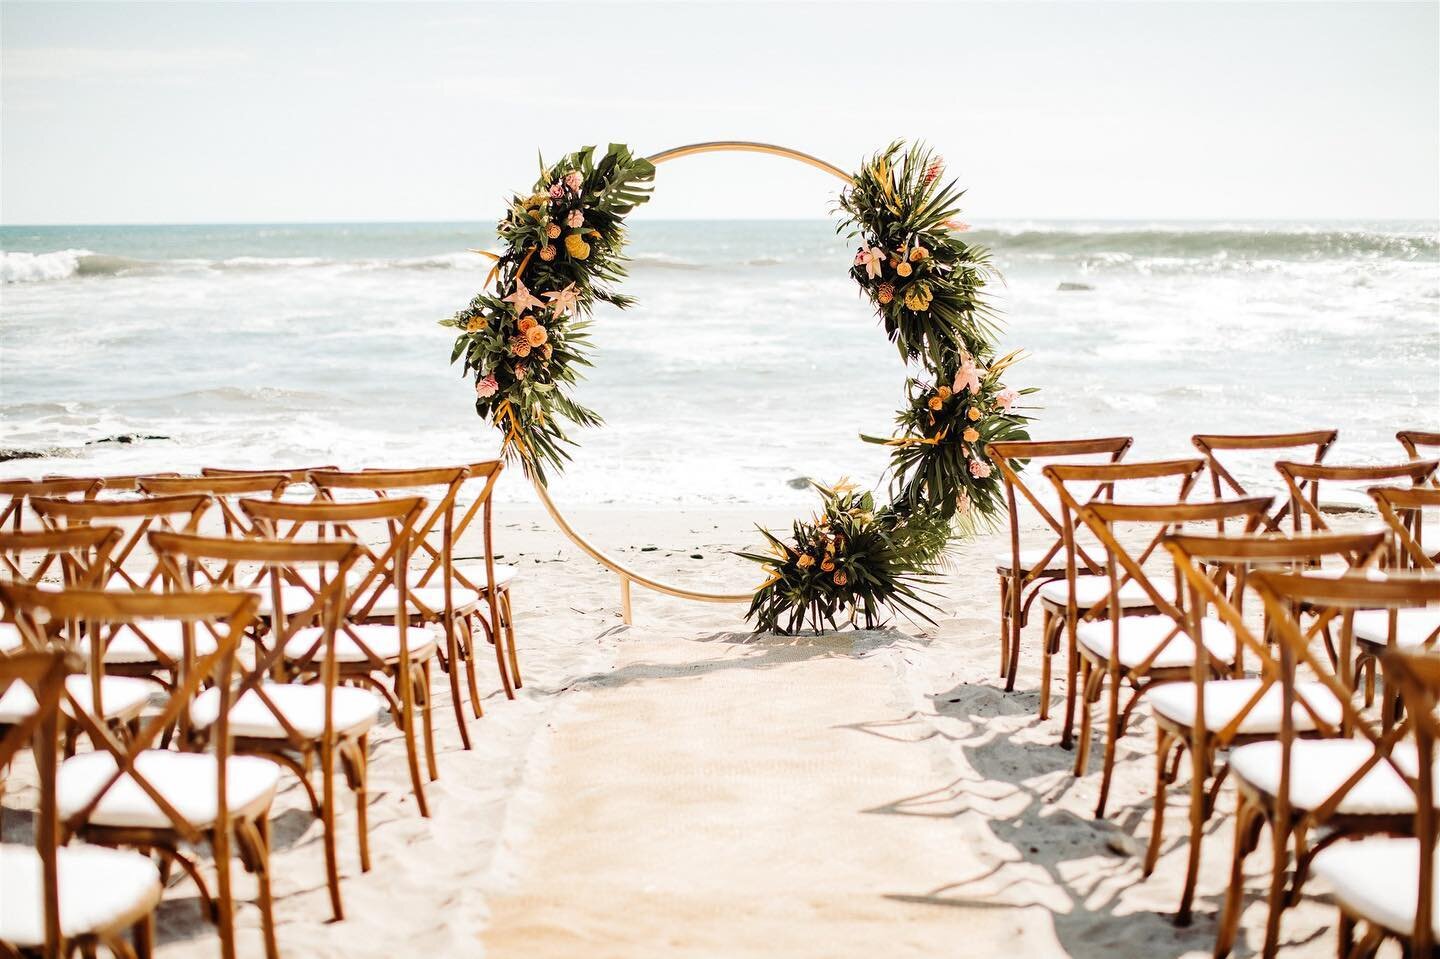 Debating on wether we should still caption our posts as it seems not a lot of people read captions. Did you read this??
.
.
{photo} @meganmccullor_photography 
{floral} @stylos_y_flores 
{rentals} @costamesaeventrentals 
{venue} @nekaui_costa_rica 
.